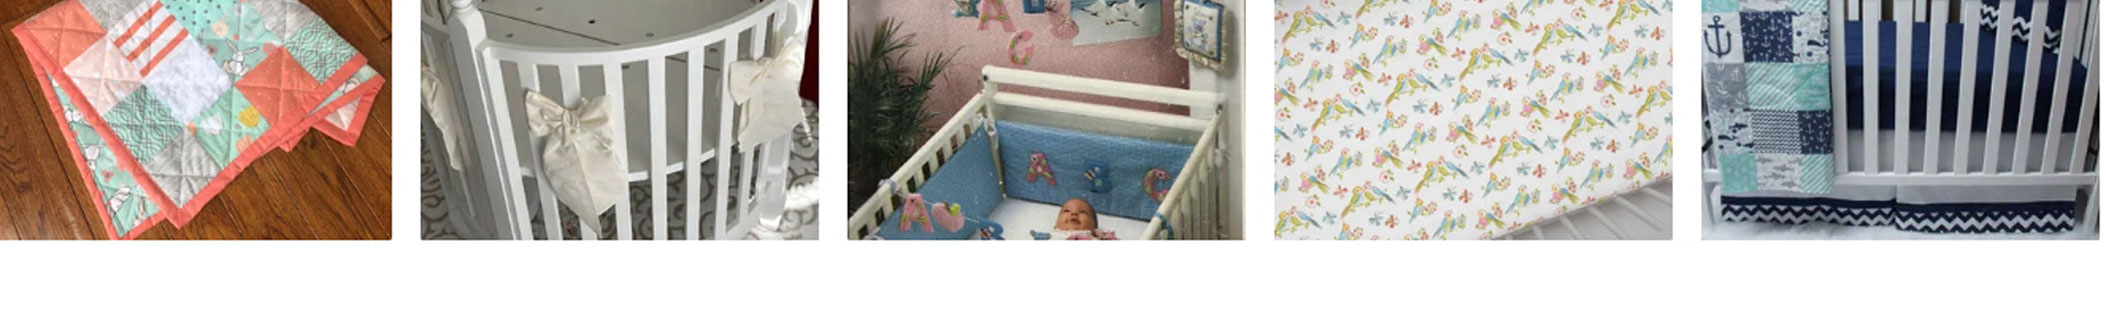 Bed,Cribs and Accessories.jpg